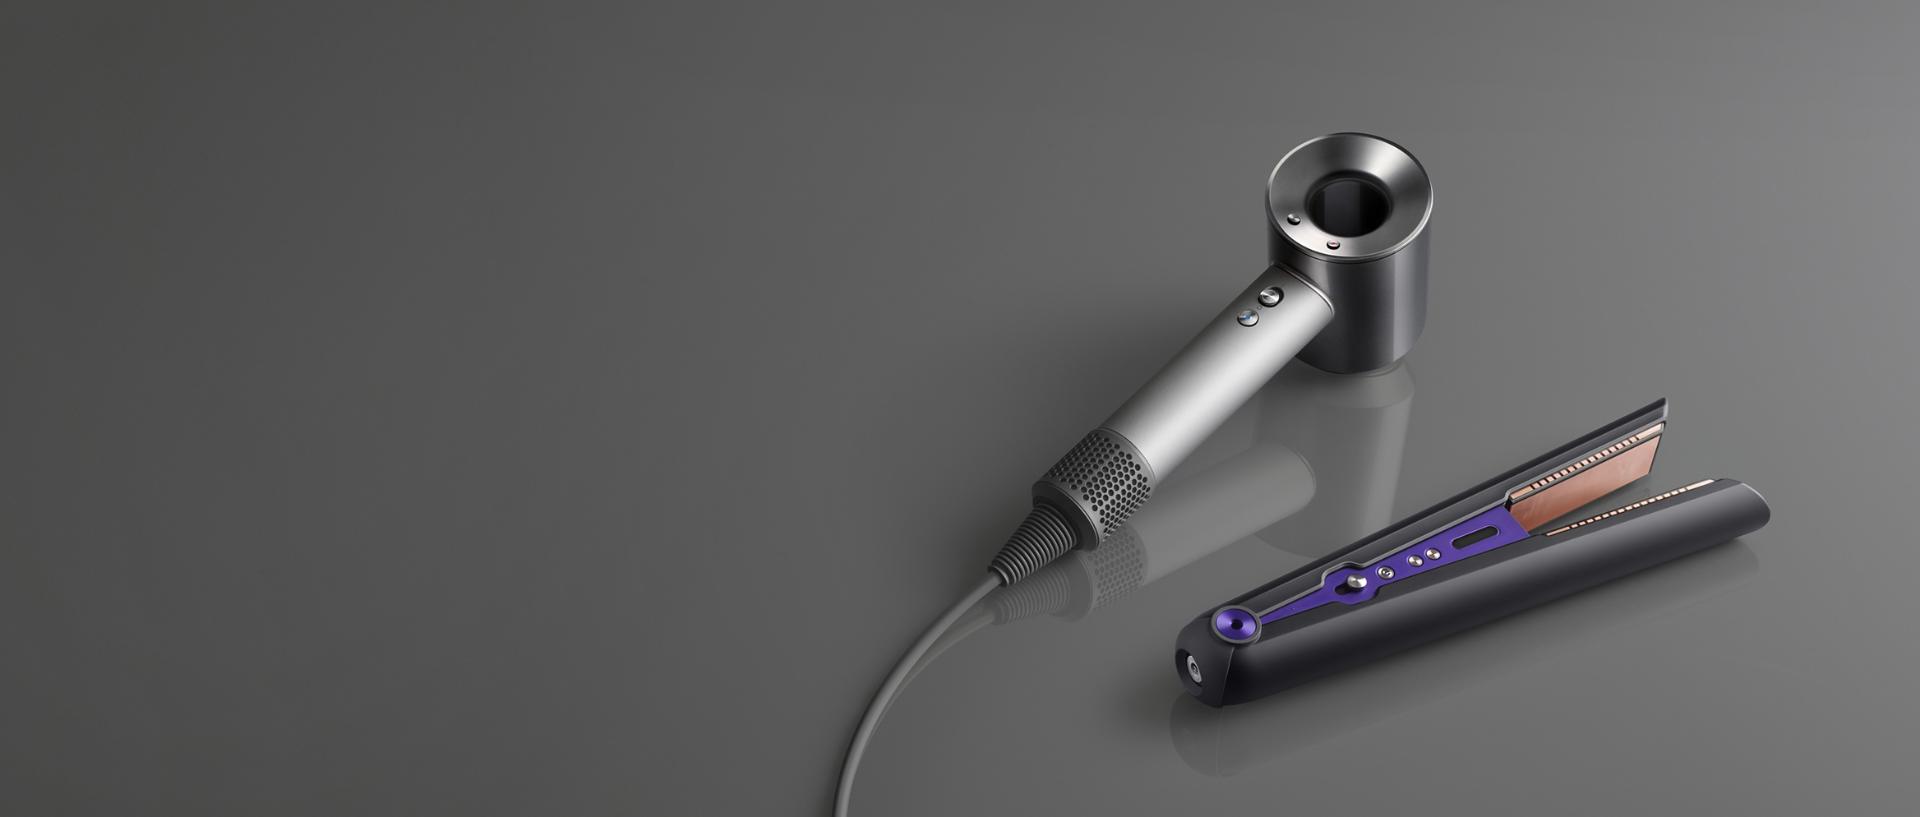 Dyson Corrale straightener and Dyson Supersonic hair dryer professional